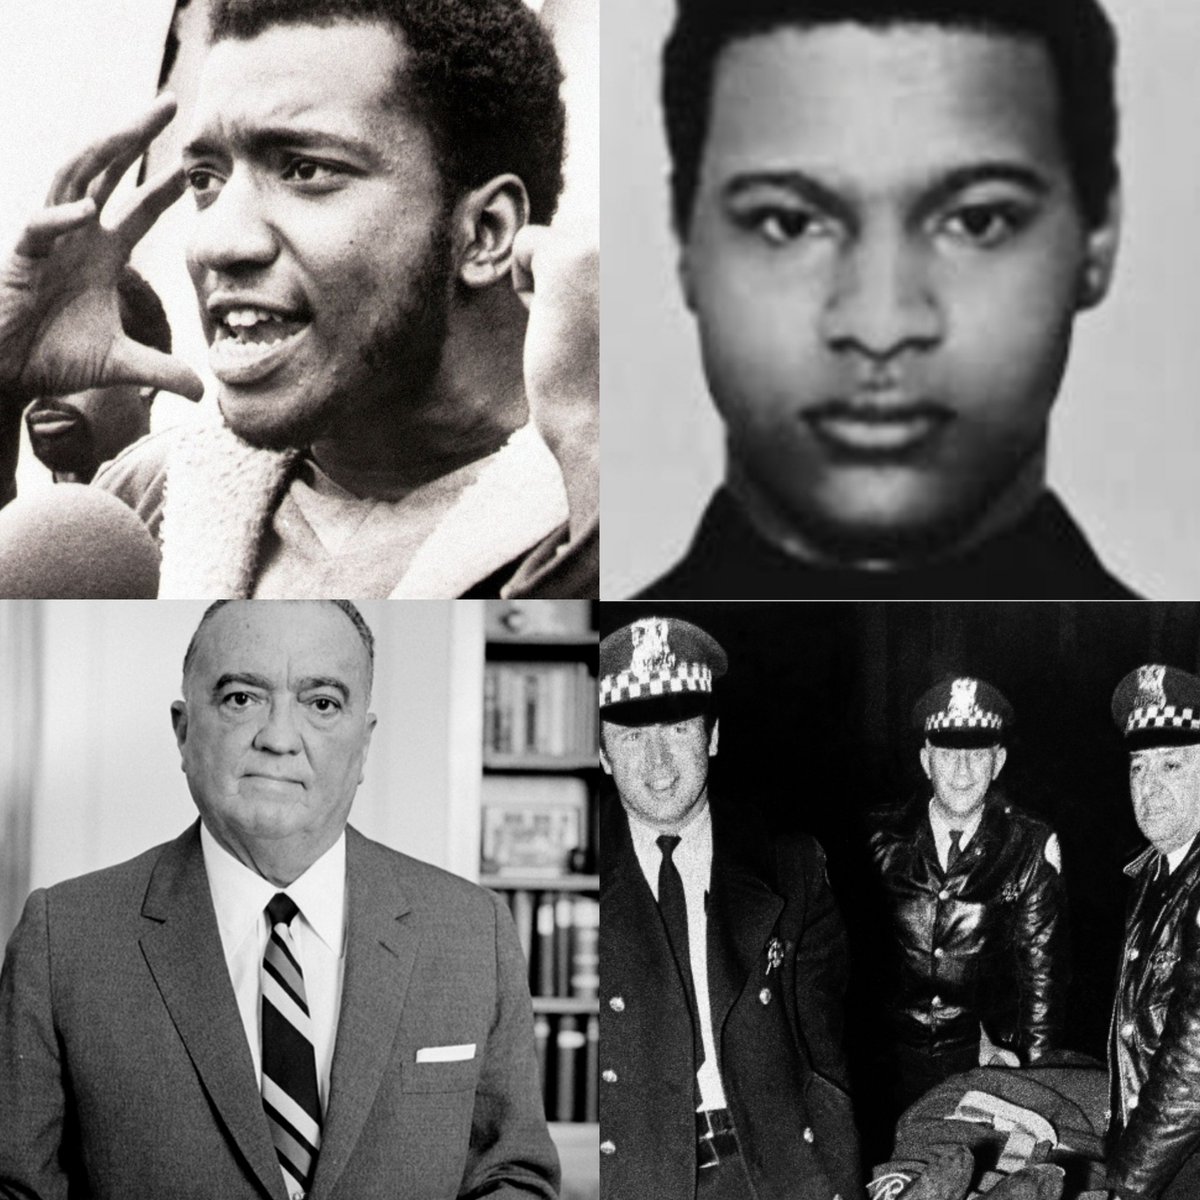 December 4, 1969 - #BlackPantherParty #Chicago chapter chairman #FredHampton and defense captain #MarkClark is assassinated by Chicago police ordered by #FBI director #JEdgarHoover.